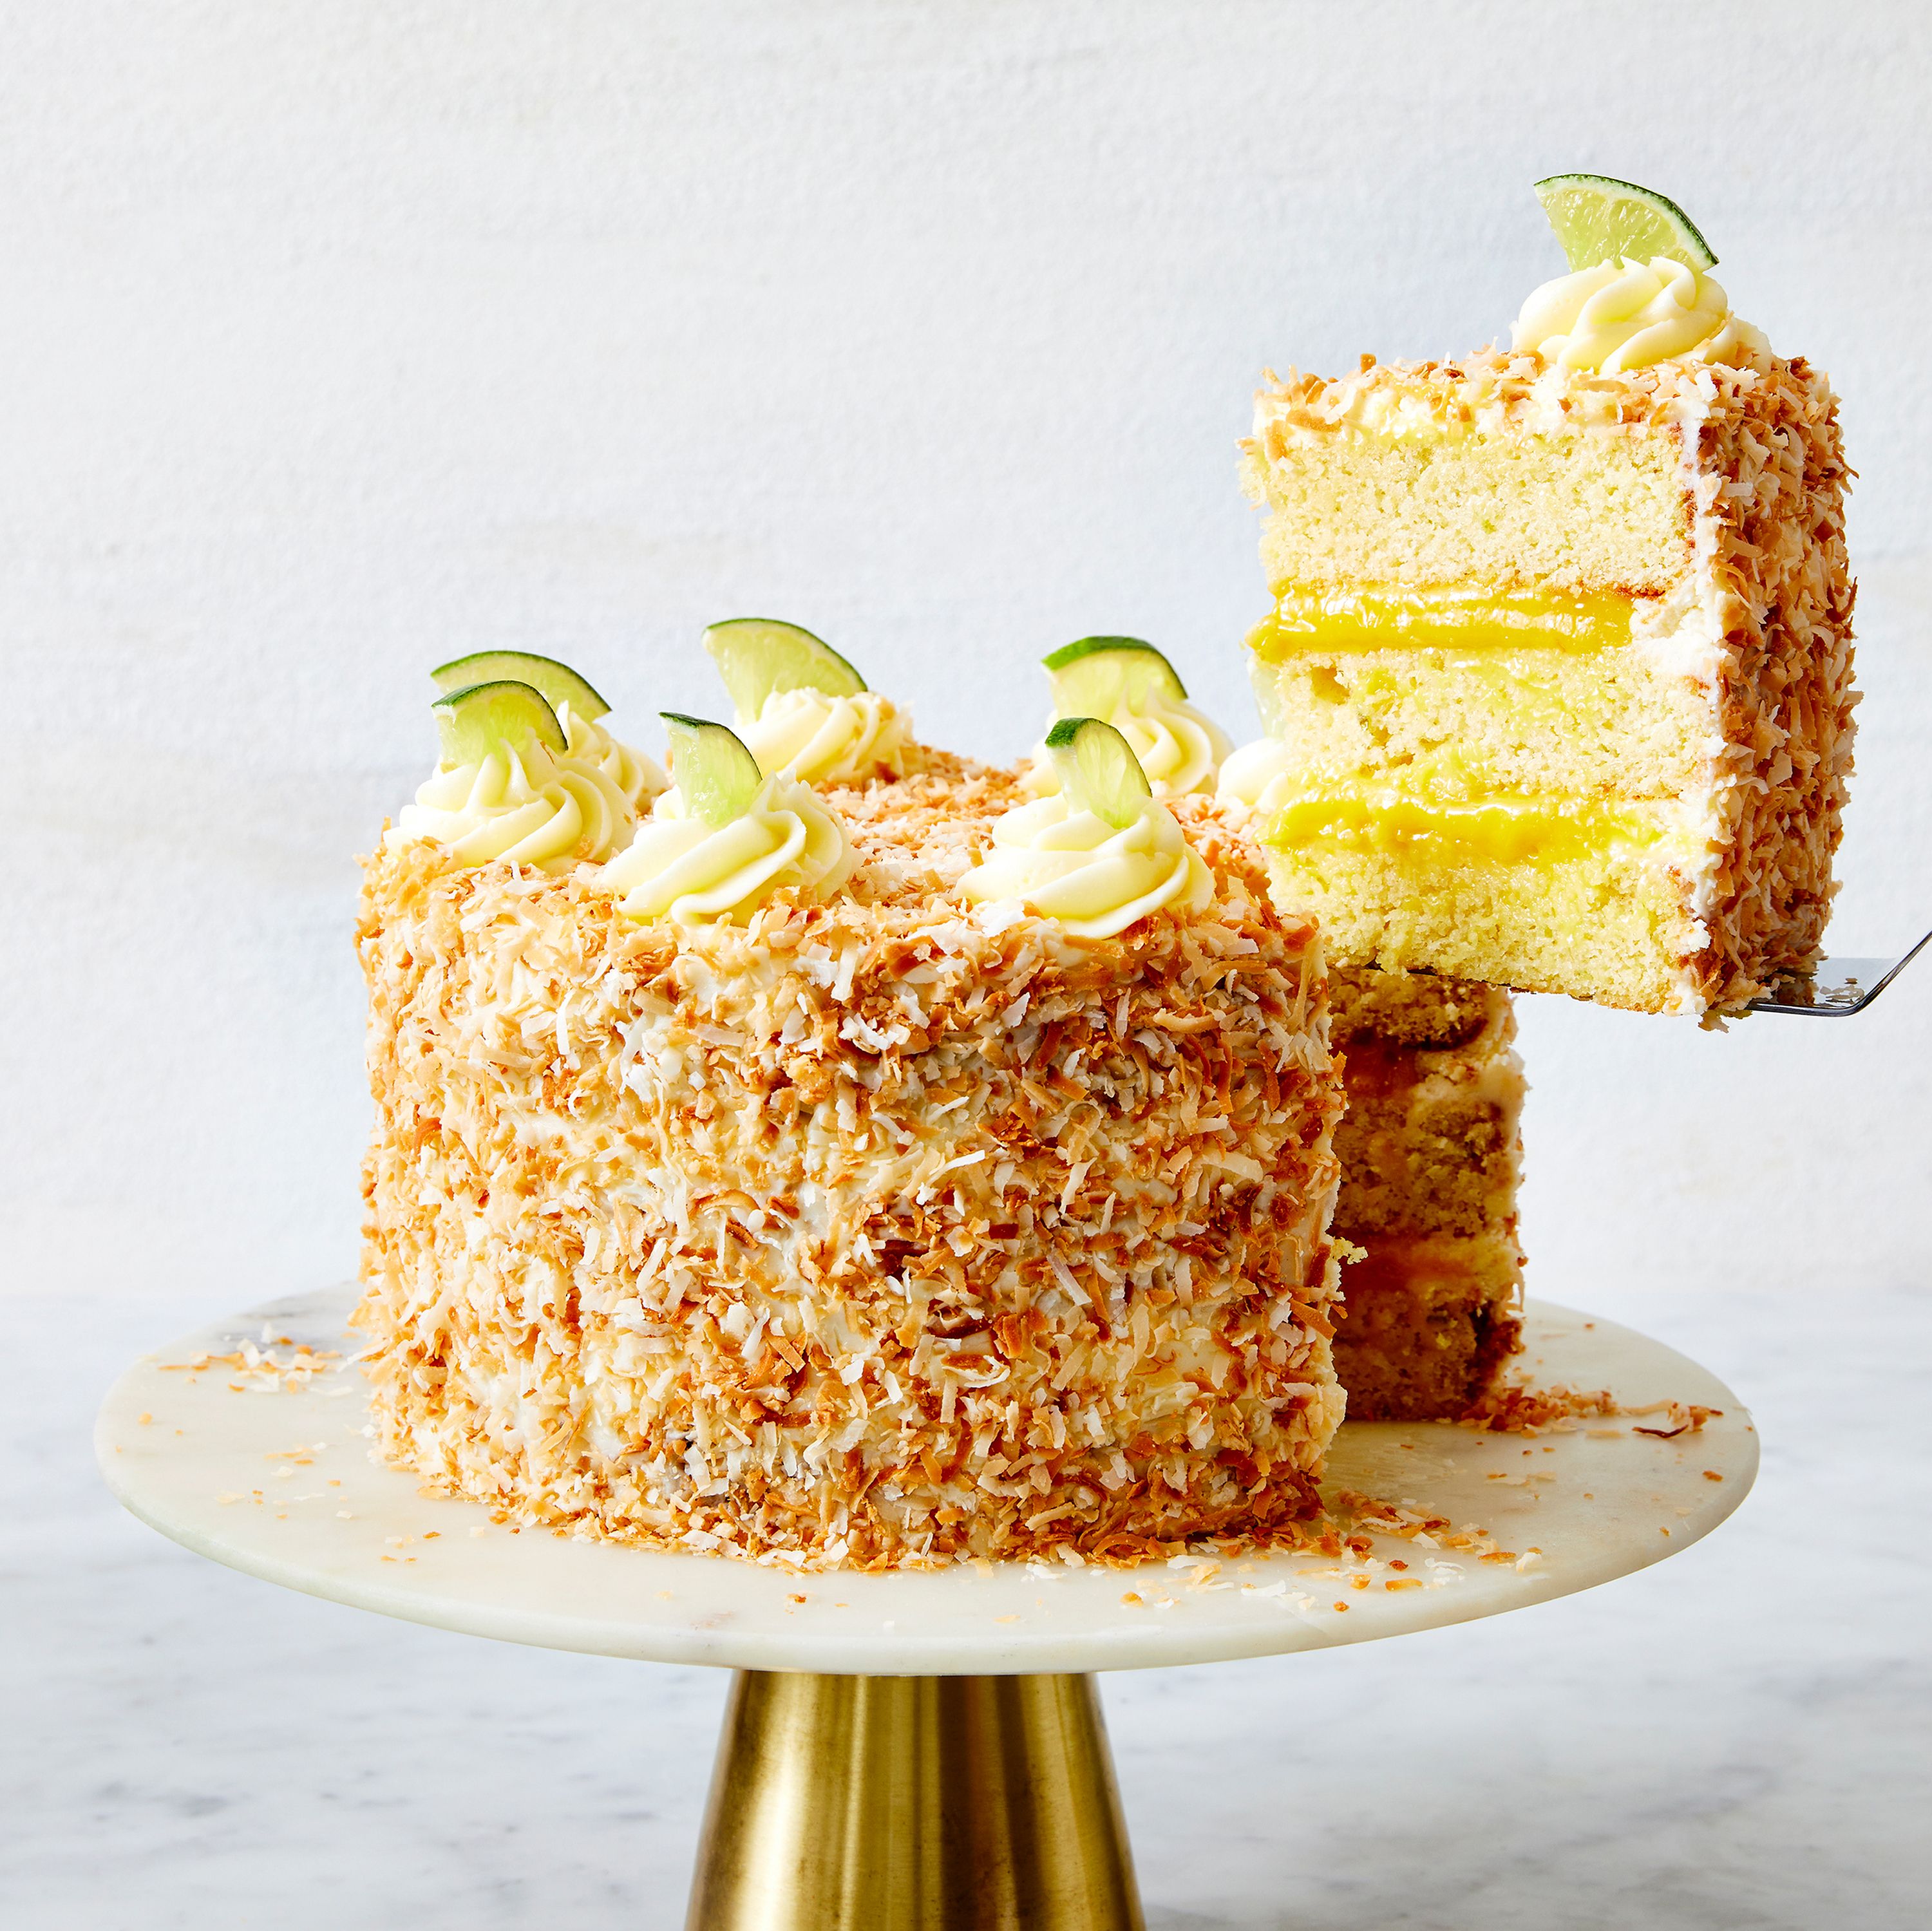 Best Coconut-Lime Layer Cake Recipe - How To Make Coconut-Lime Layer Cake